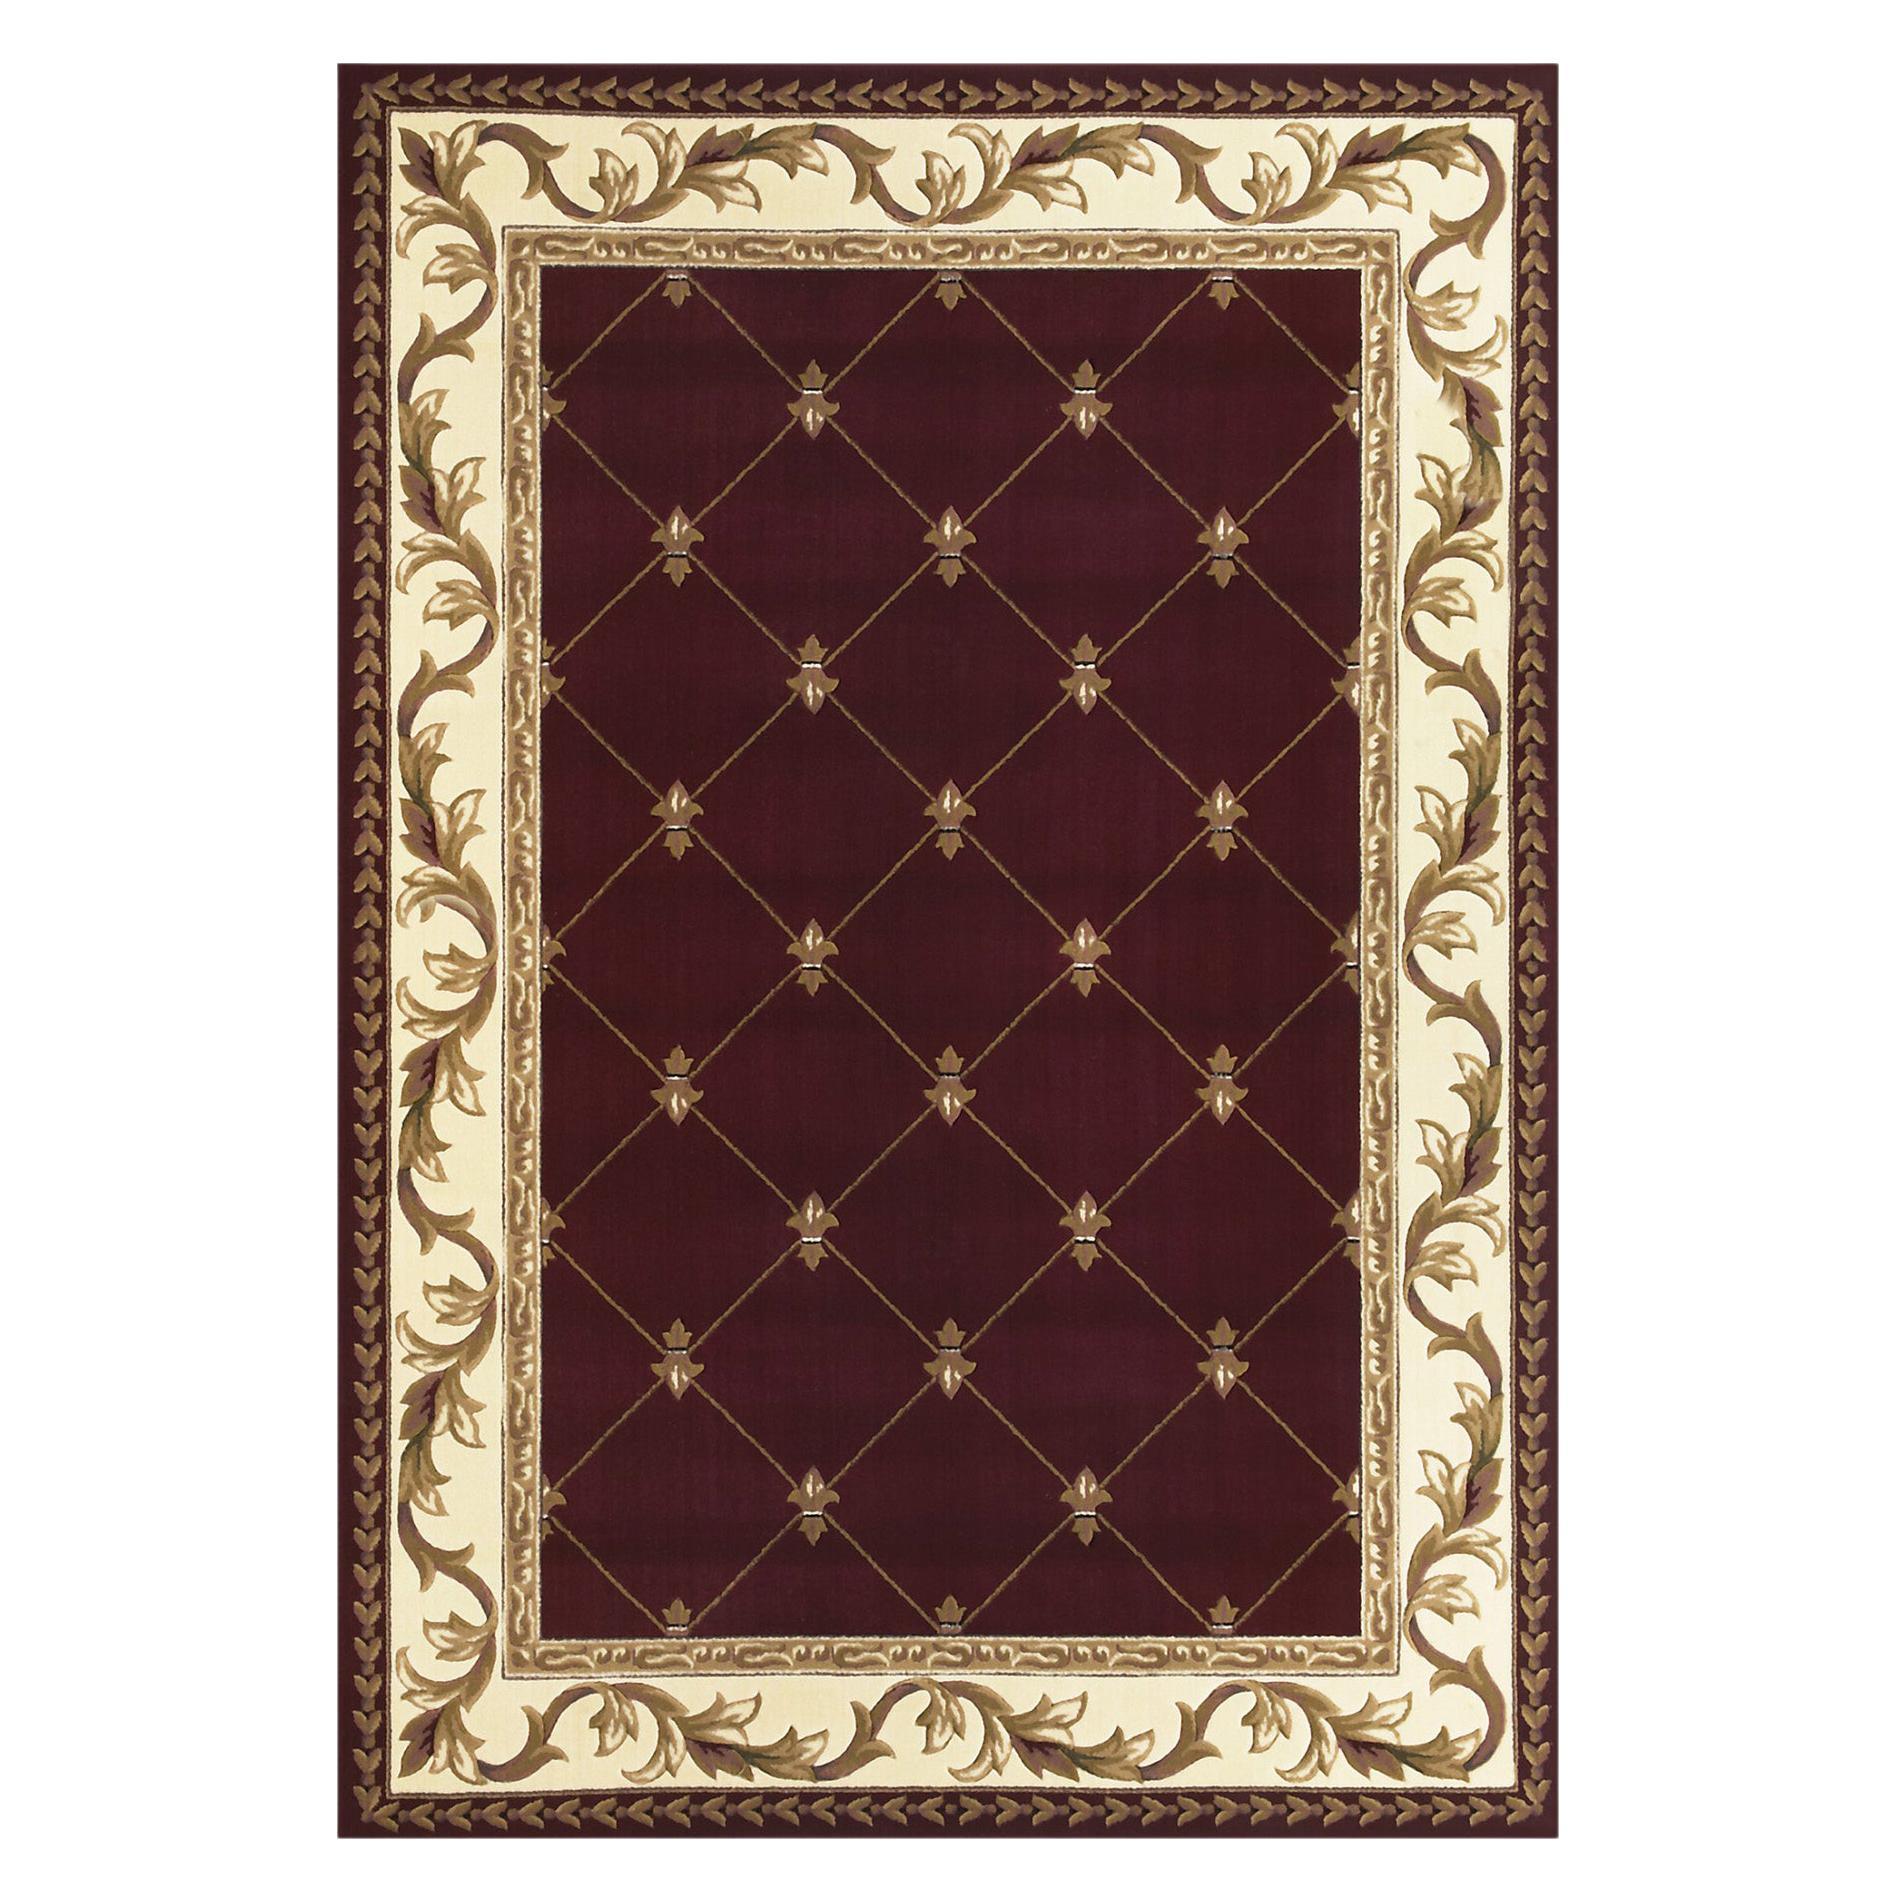 21st Century Bamboo Silk Handknotted Rug by Modenese Interiors, Red and Gold For Sale